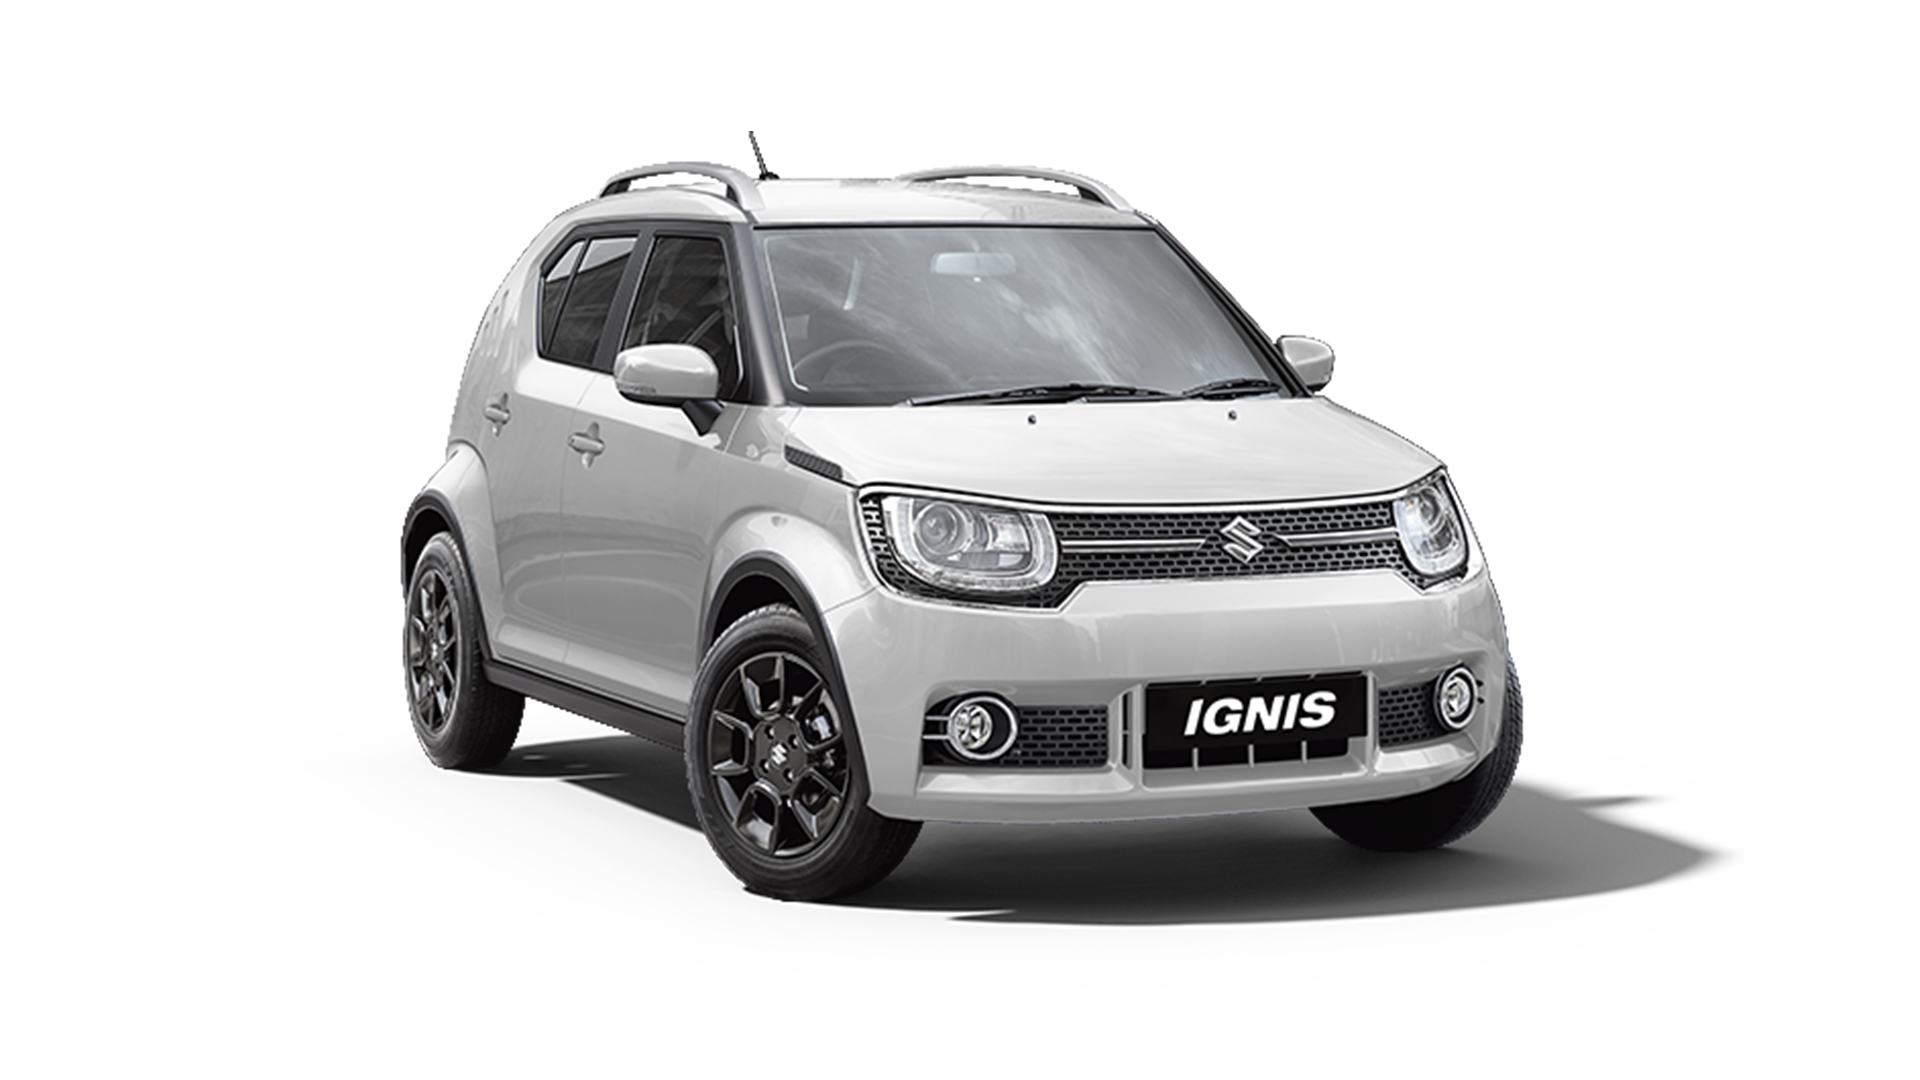 Ignis [2019 2020] Image & Exterior Photo Gallery [Images]